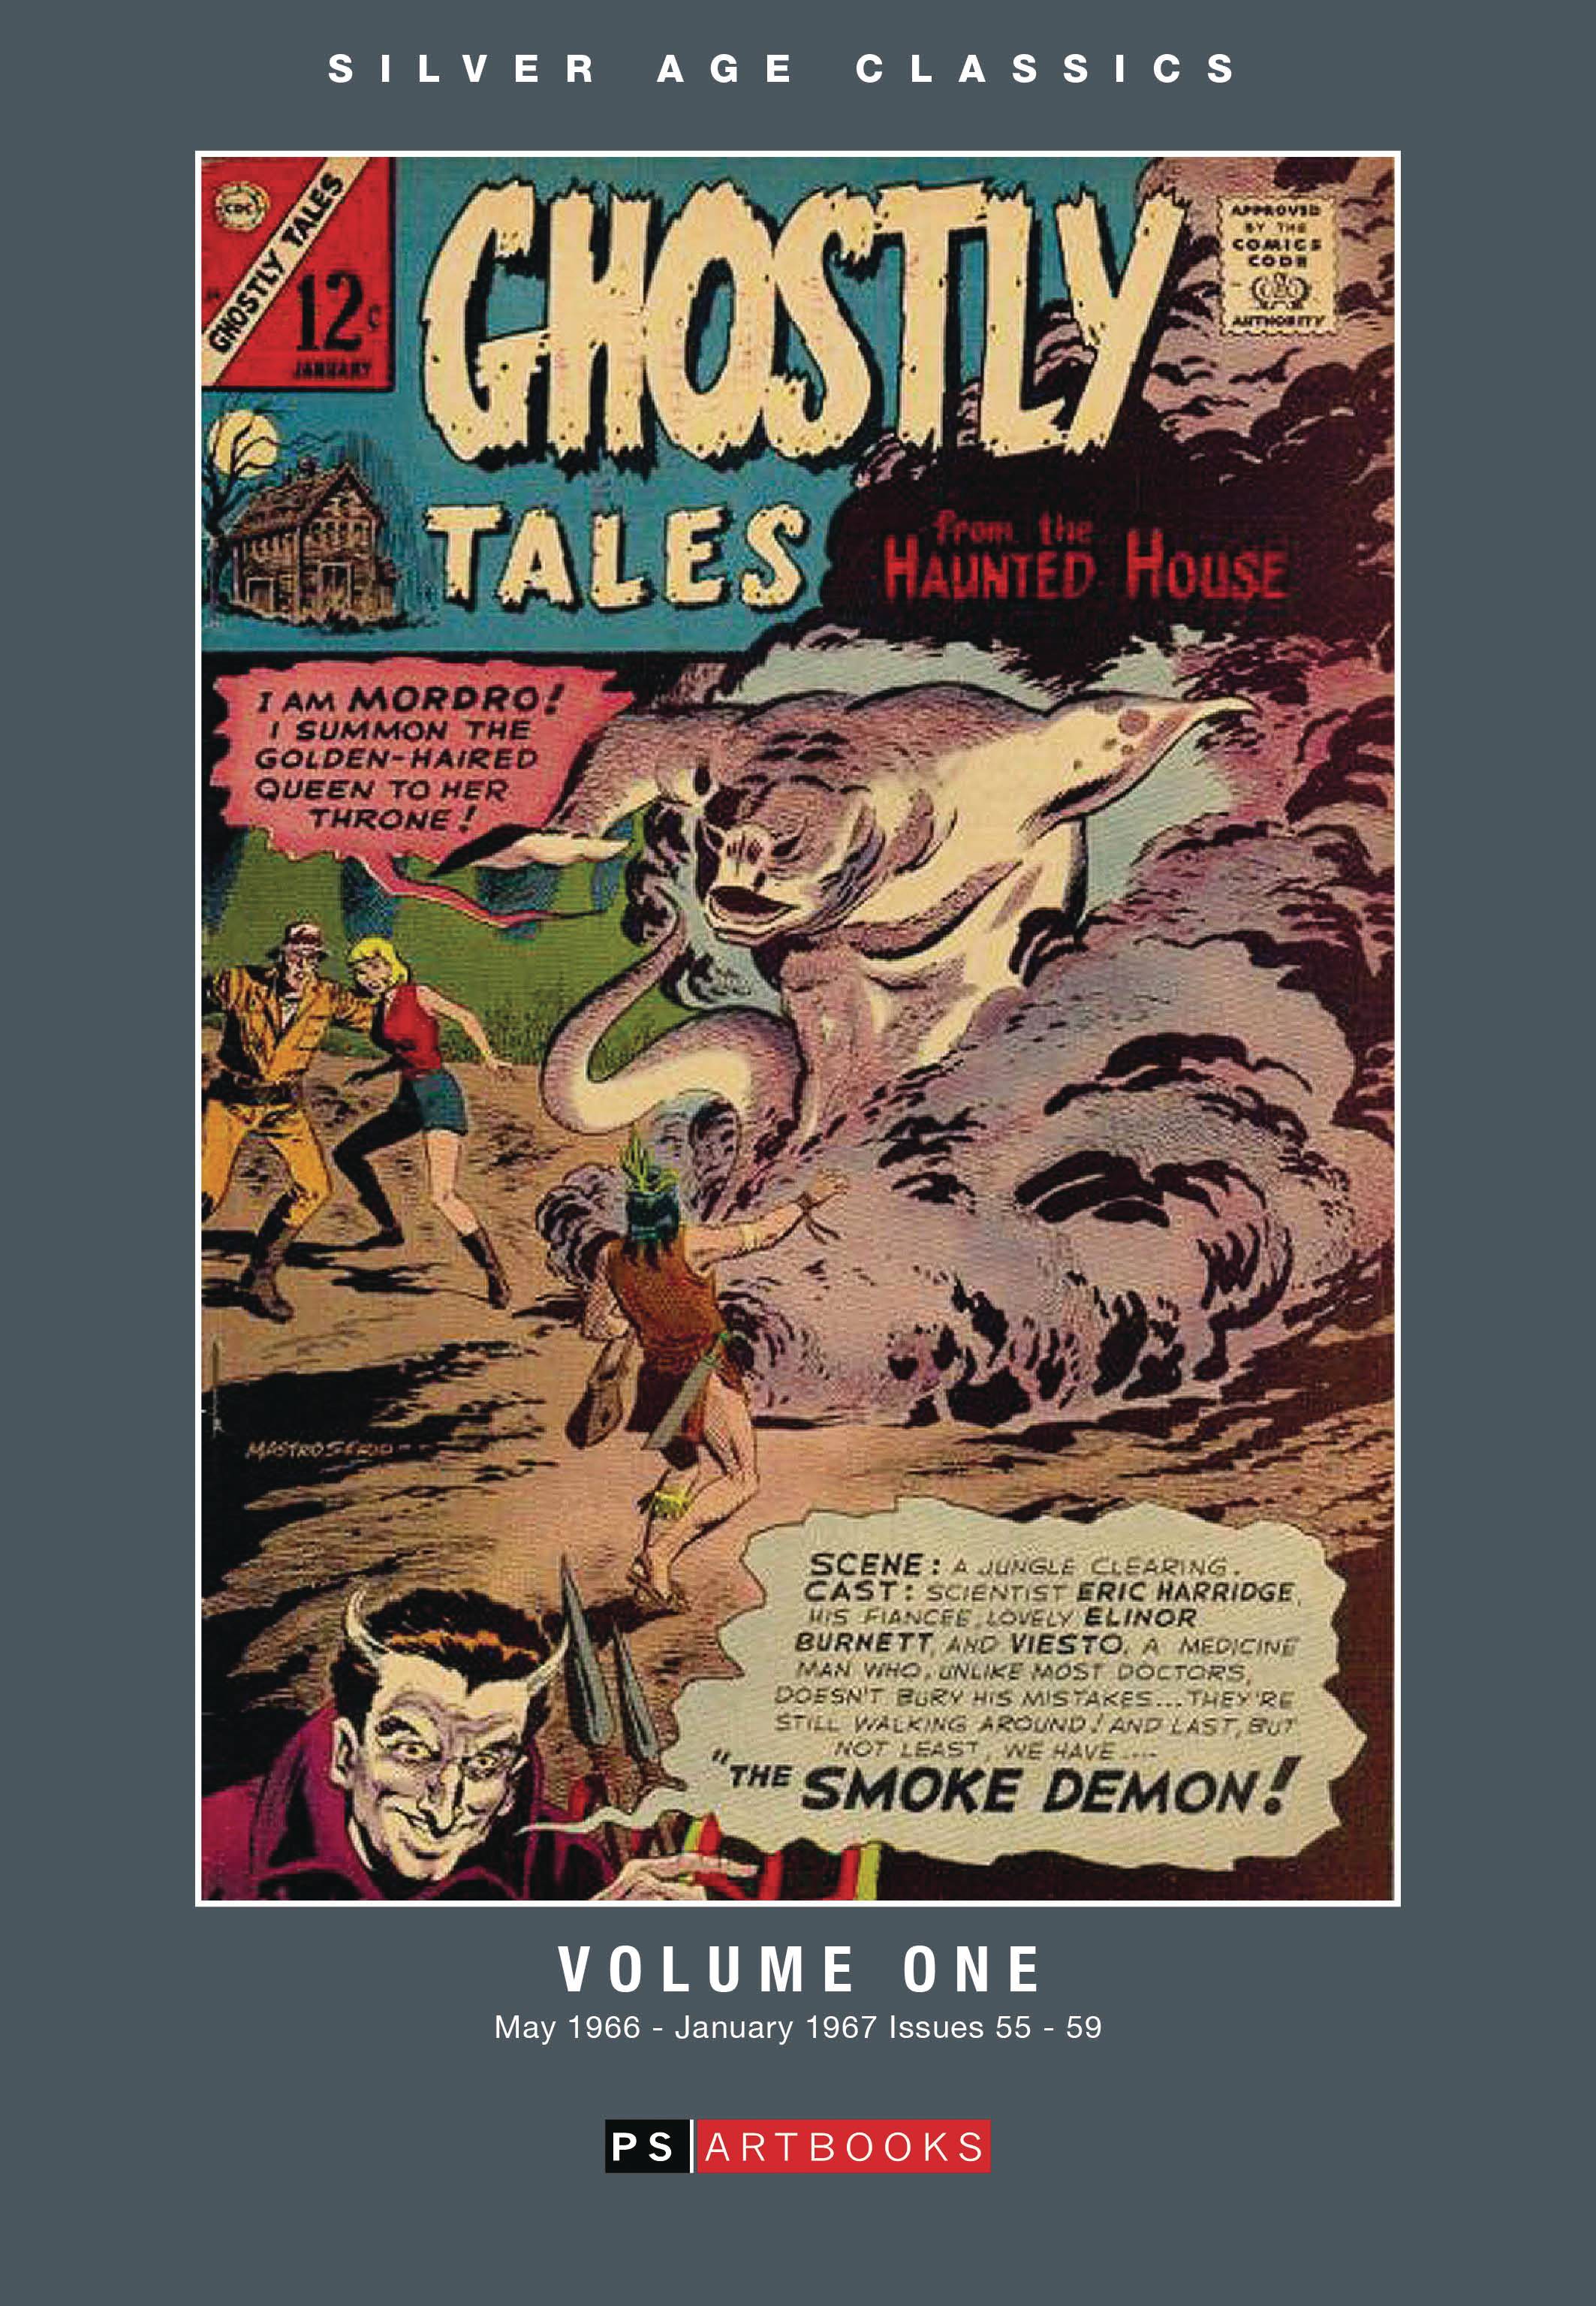 SILVER AGE CLASSICS GHOSTLY TALES HC VOL 01